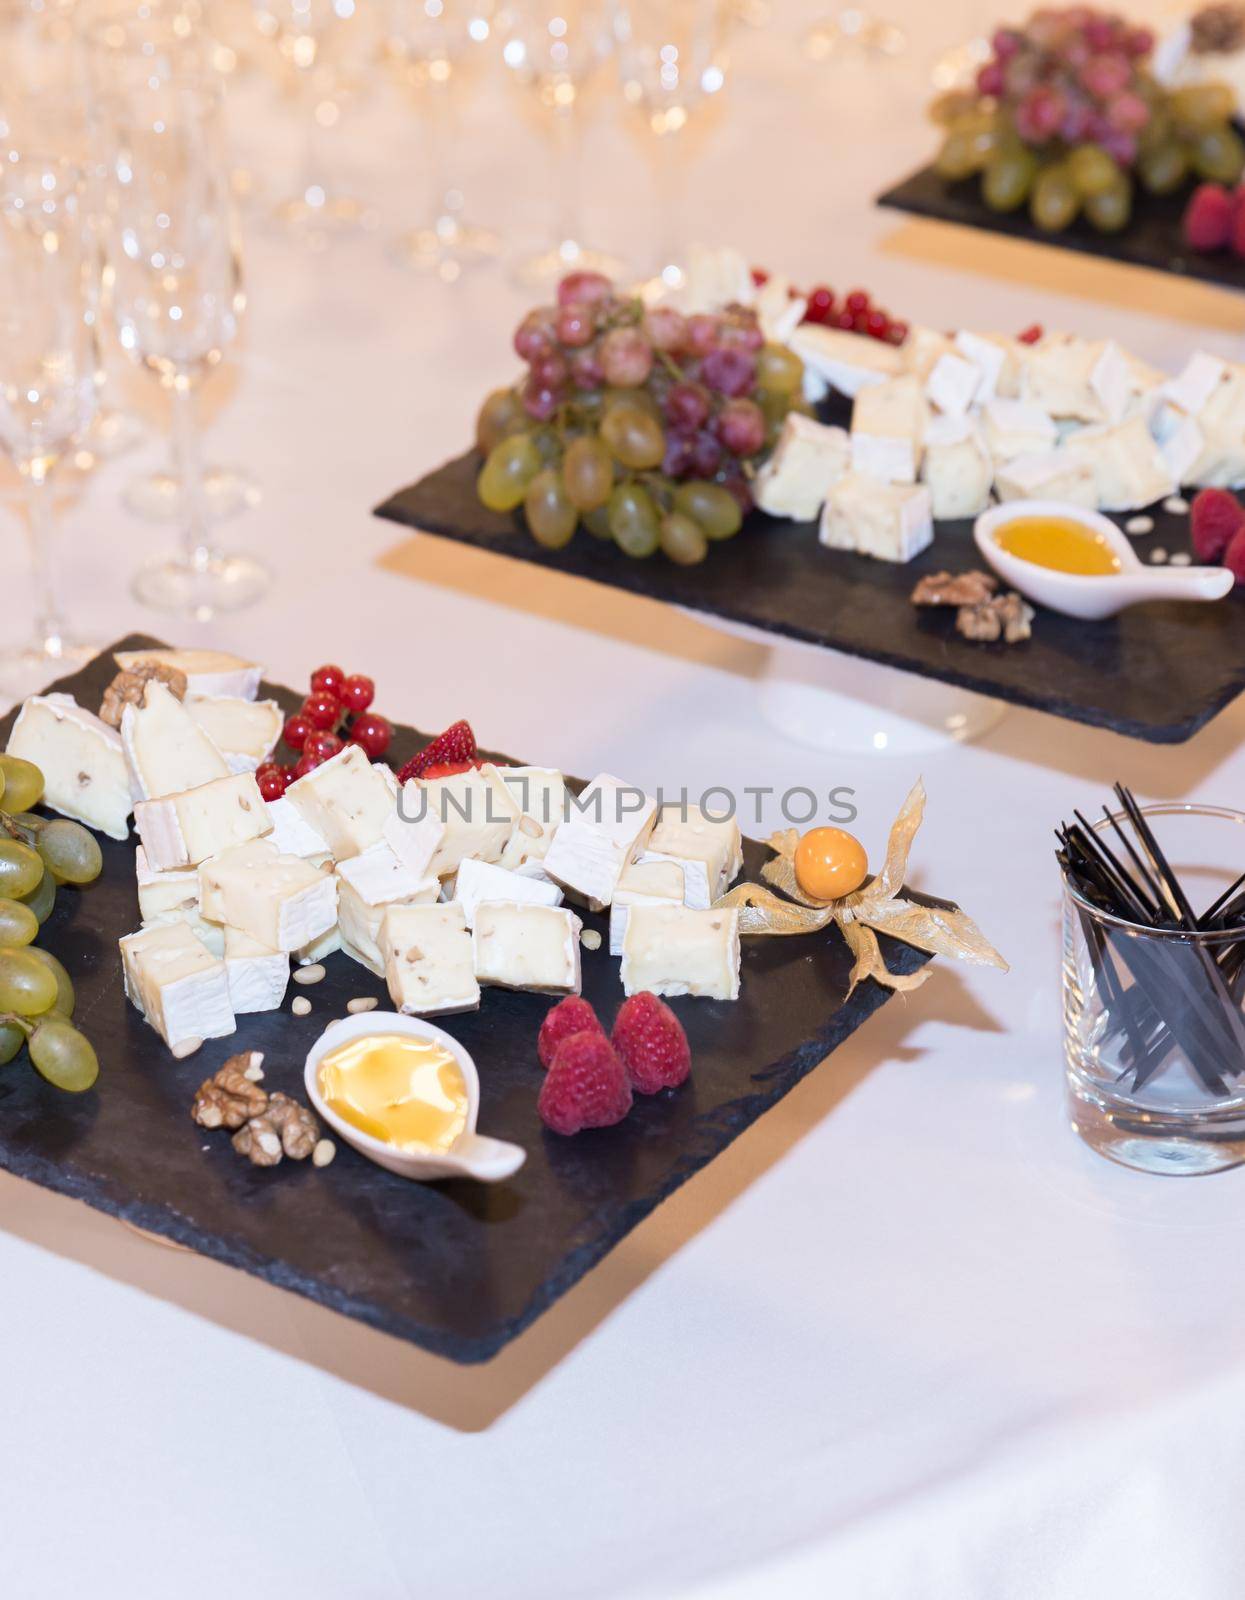 Buffet table with brie cheese and grapes